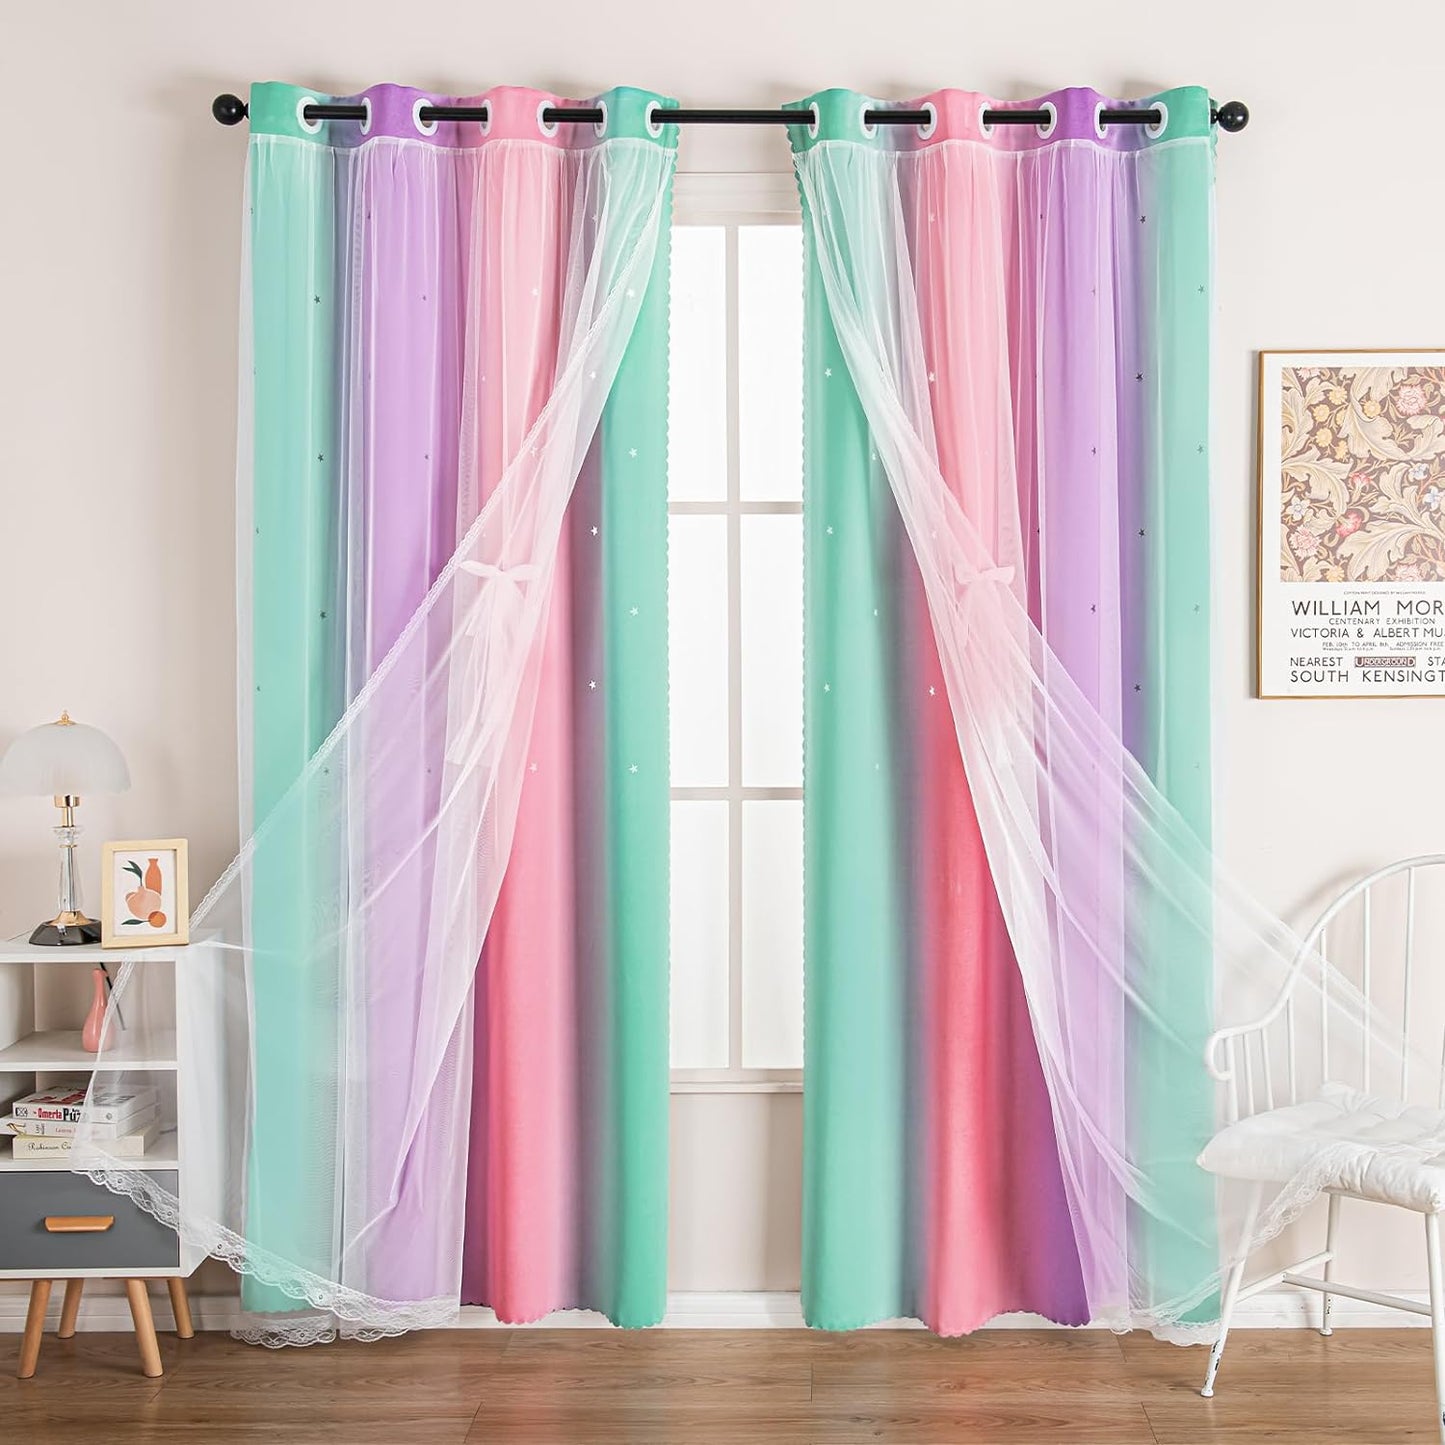 UNISTAR 2 Panels Stars Blackout Curtains for Bedroom Girls Kids Baby Window Decoration Double Layer Star Cut Out Aesthetic Living Room Decor Wall Home Curtain,W52 X L63 Inches,Pink  UNISTAR 2 Panels 丨 Rainbow-Pinkpurple-Green 63.00" X 52.00" 